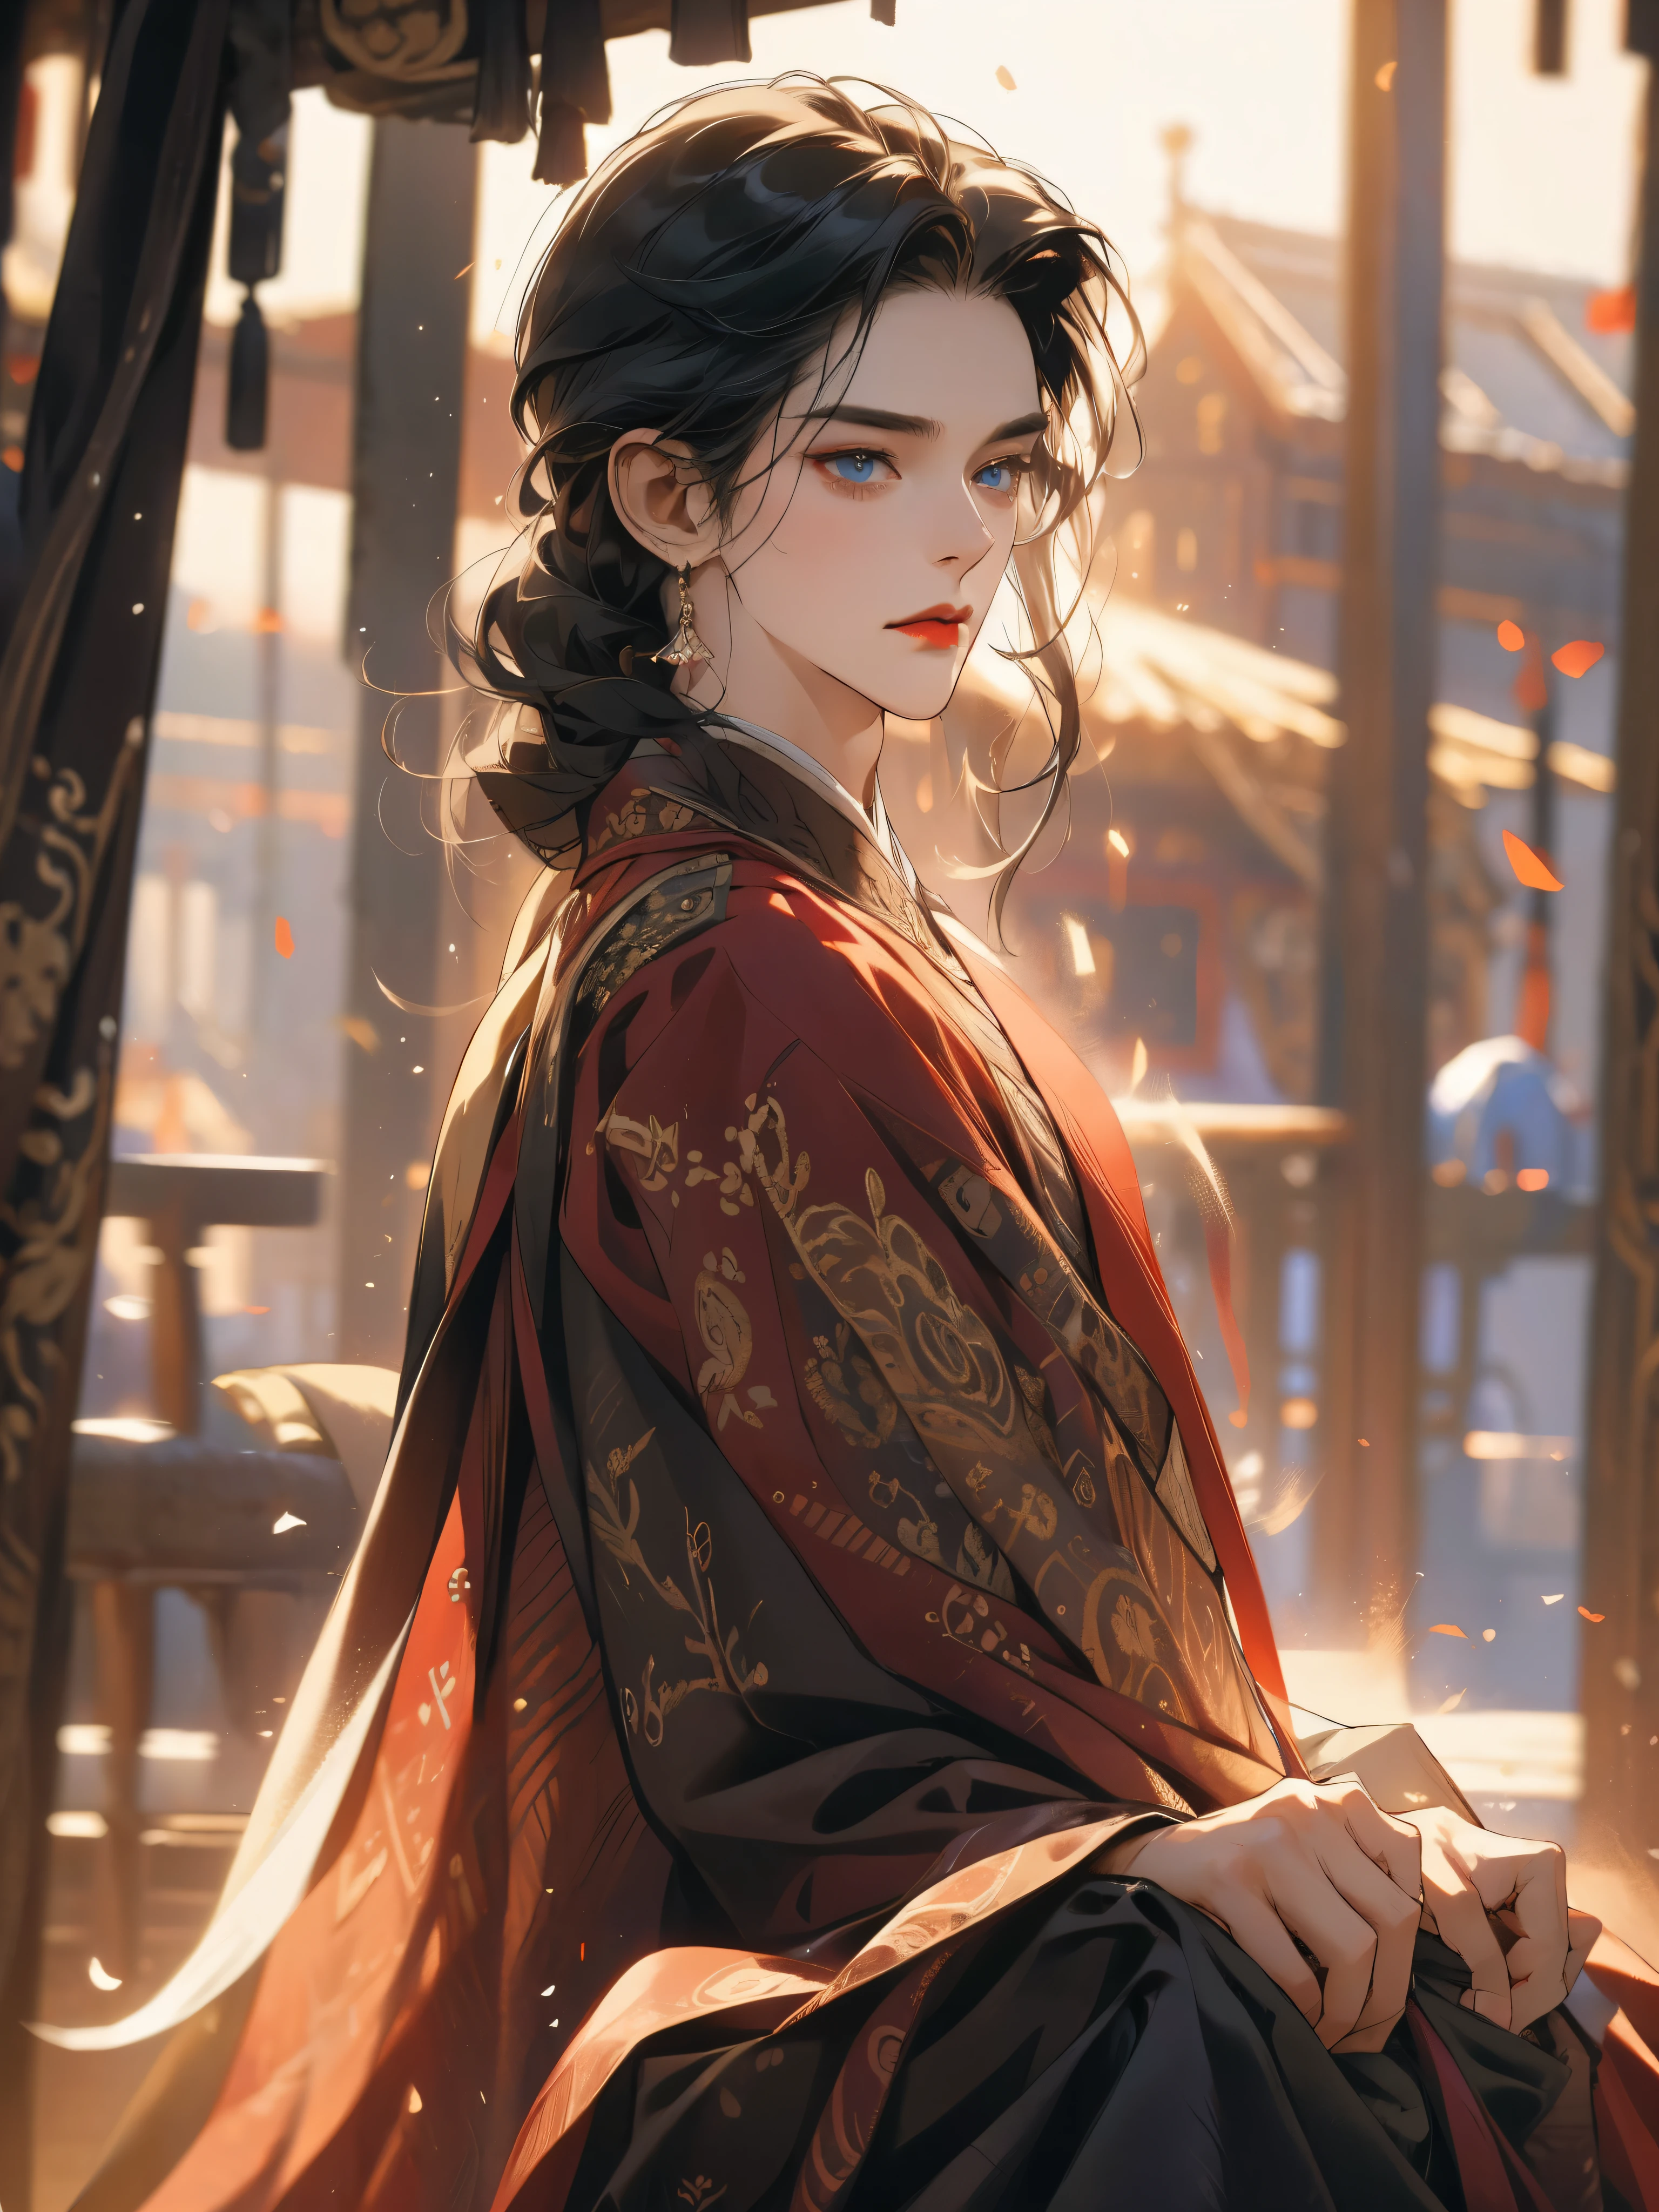 work of art, best qualityer, HDR, perfect illustration, perfectionist anatomy, dynamic light, one  men, standing alone, tenet, black clothing, tails, blue colored eyes, Bblack hair, royal dress, posh, tears, Red lips, bonitas, hooked, tenet, 苗条, naive eyes